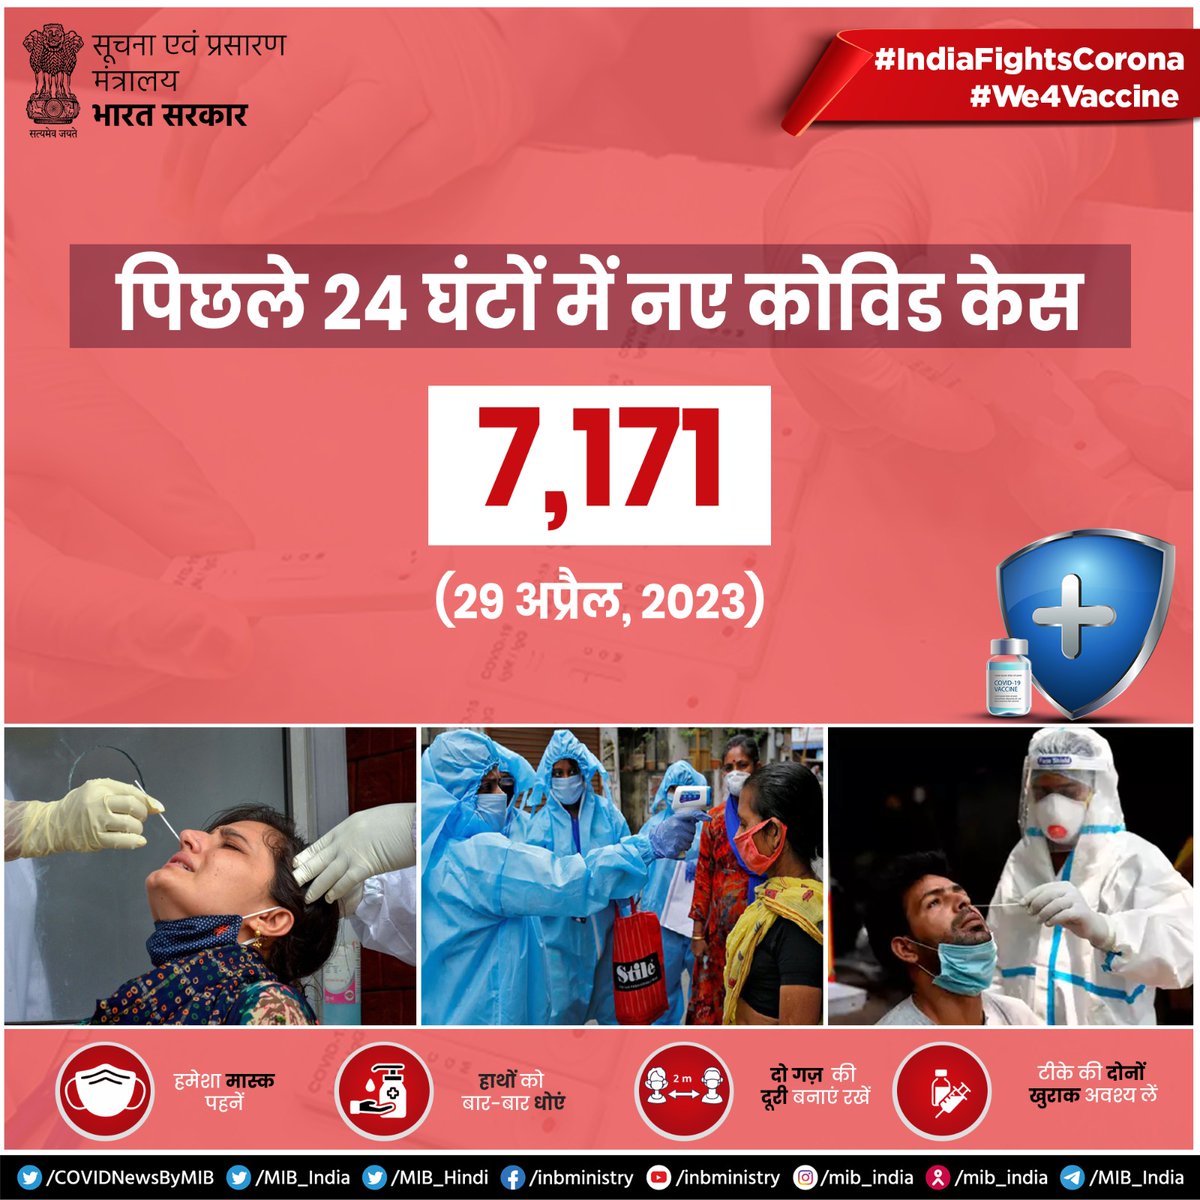 #IndiaFightsCorona: 📍New #COVID19 cases in last 24 hours (As on 29th April, 2023): 7,171 ✅Keep following #COVIDAppropriateBehaviour ➡️Always wear a mask ➡️Wash/sanitize hands regularly ➡️Maintain distancing ➡️Get yourself fully vaccinated #Unite2FightCorona #We4Vaccine